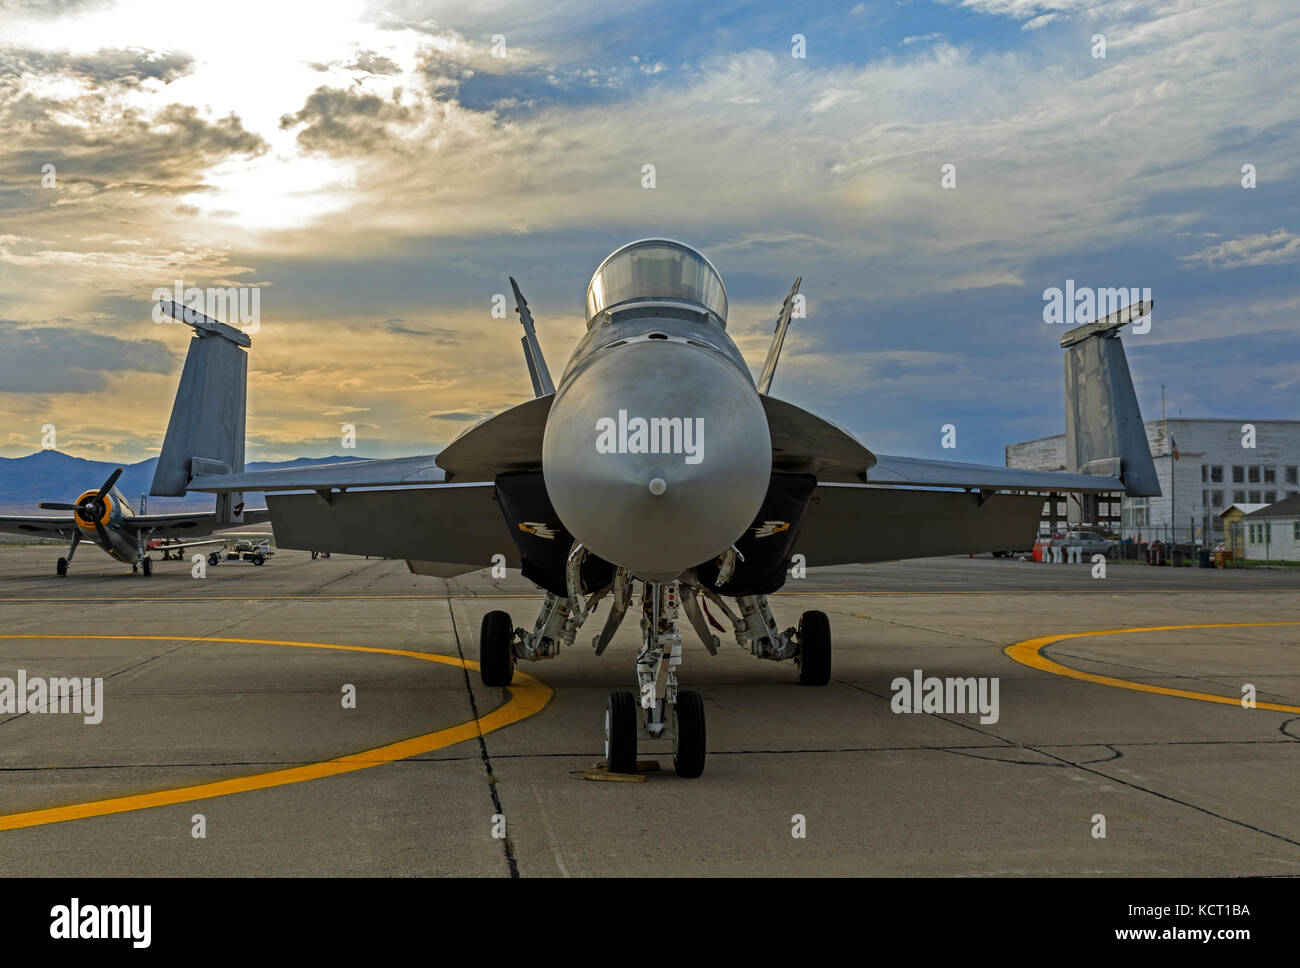 In this shot a U.S. Navy E/F-18E Super Hornet sits on the tarmac at sunset at the Historic Wendover Airfield in Wendover, Utah, USA. Stock Photo